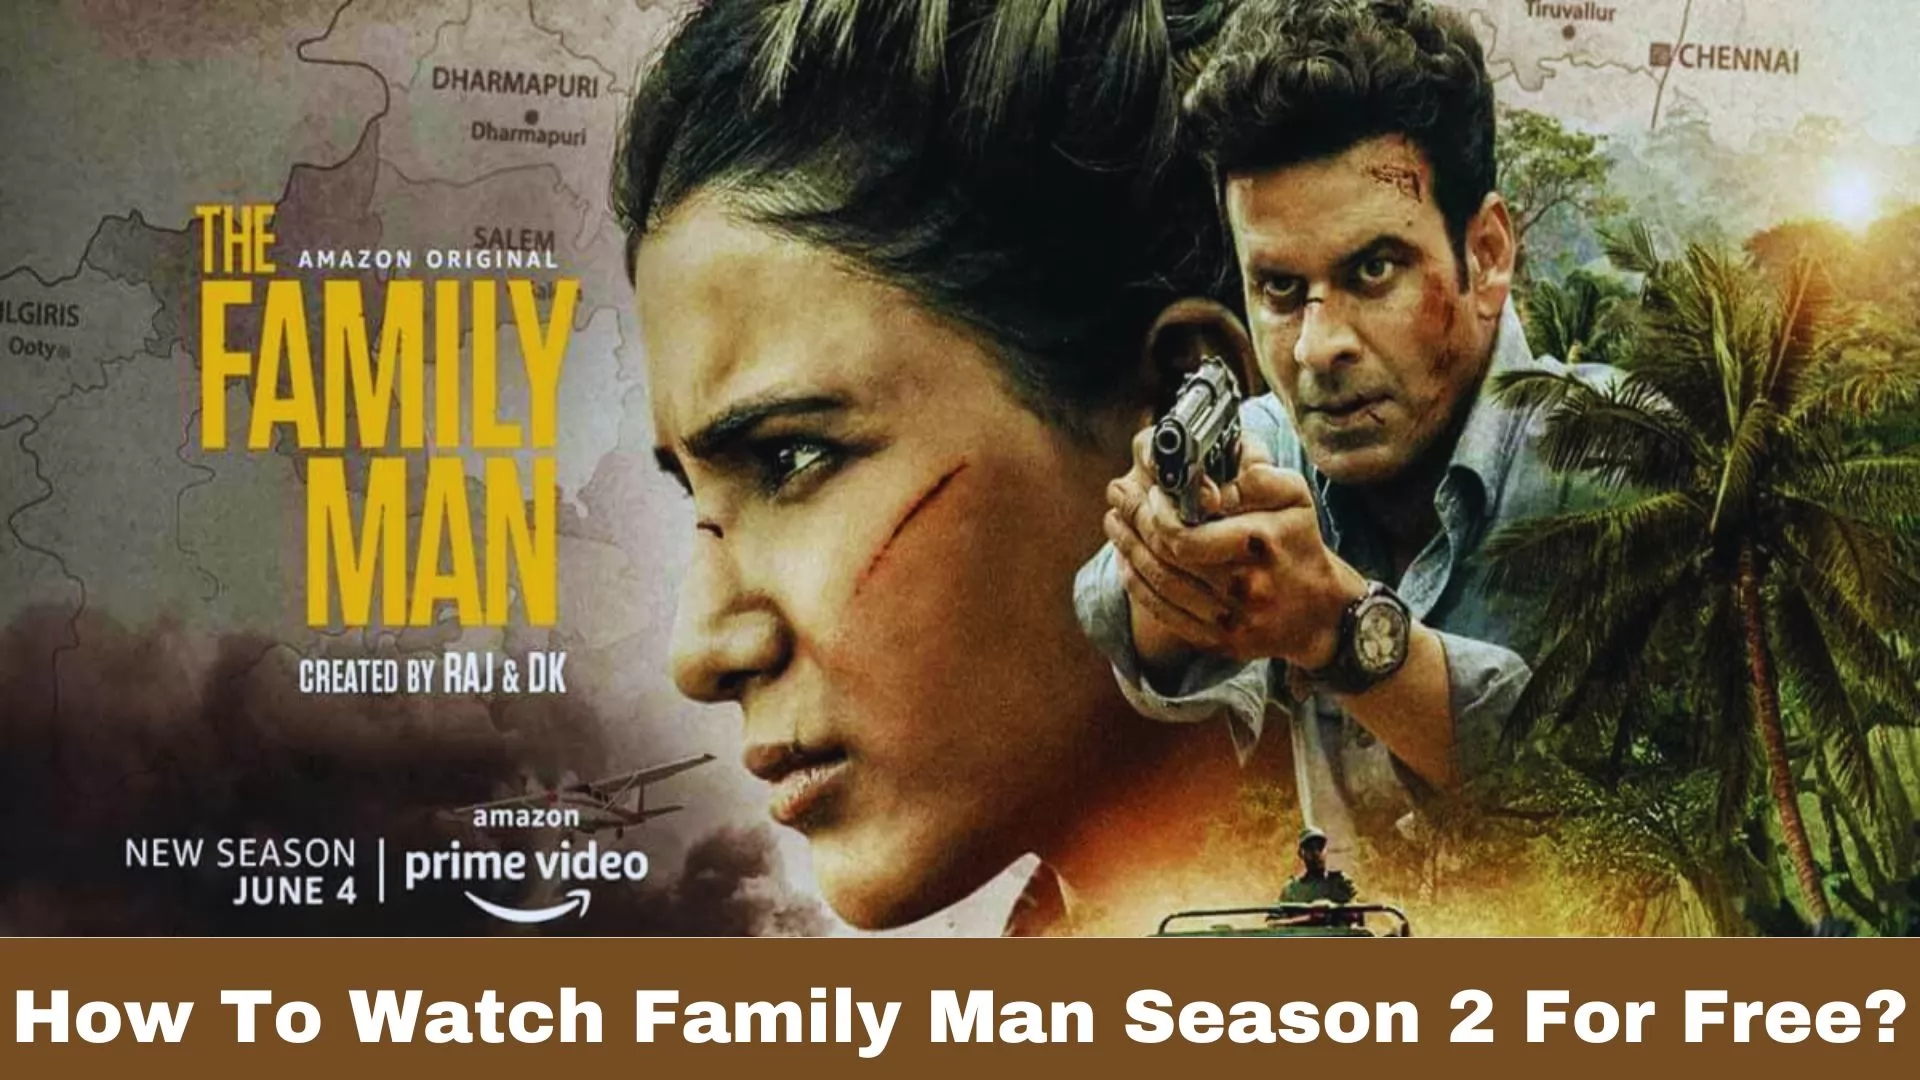 How To Watch Family Man Season 2 For Free?